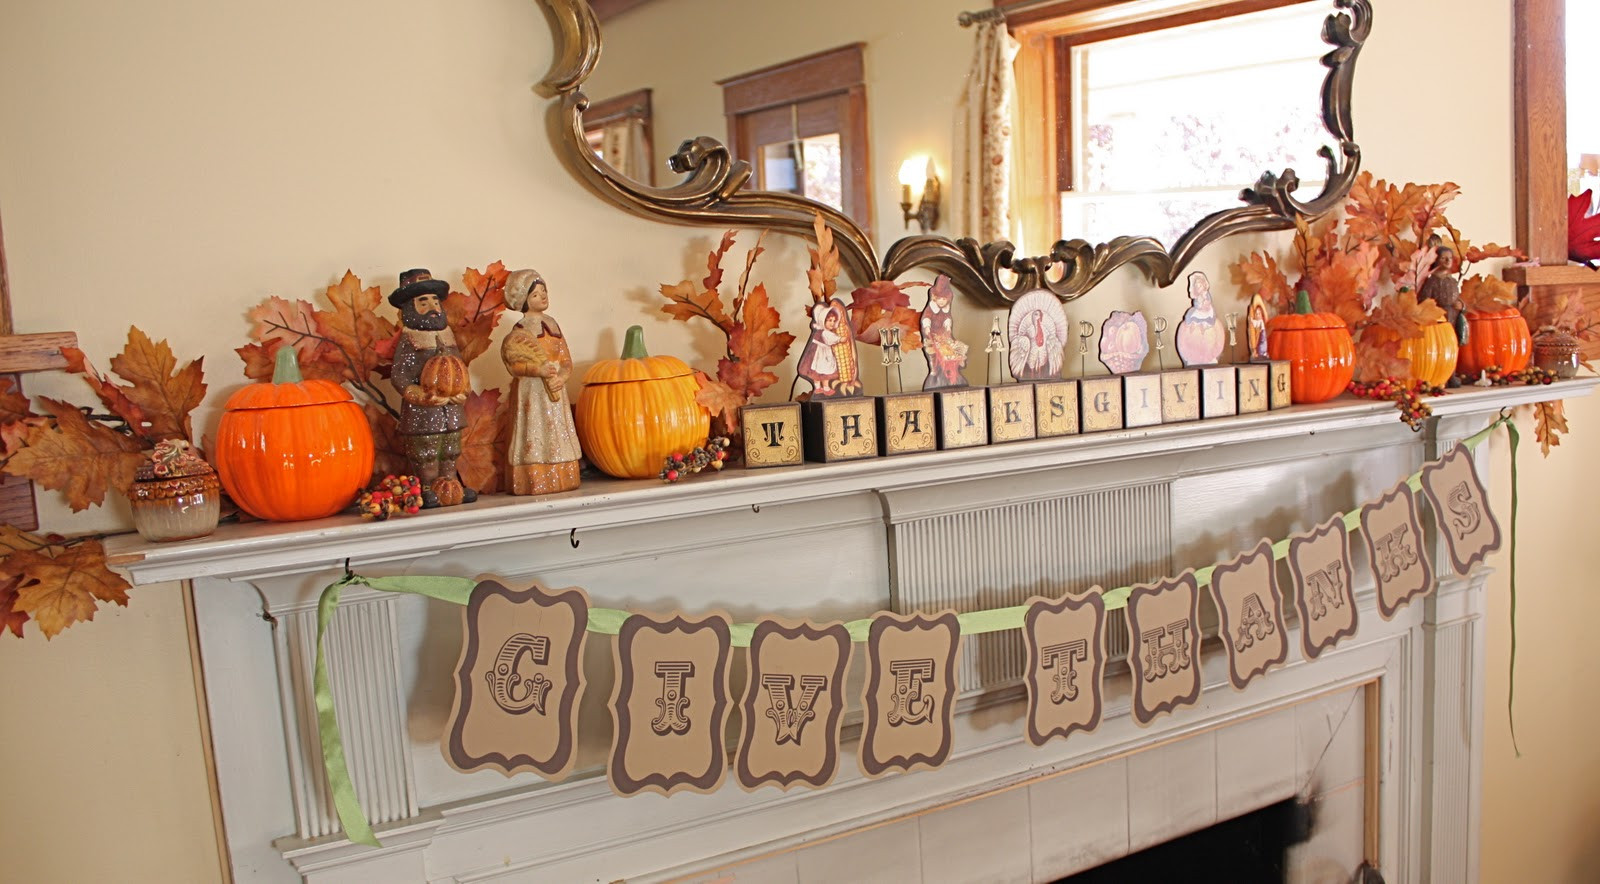 Thanksgiving Mantel Ideas
 At Second Street Thanksgiving mantel and other decor